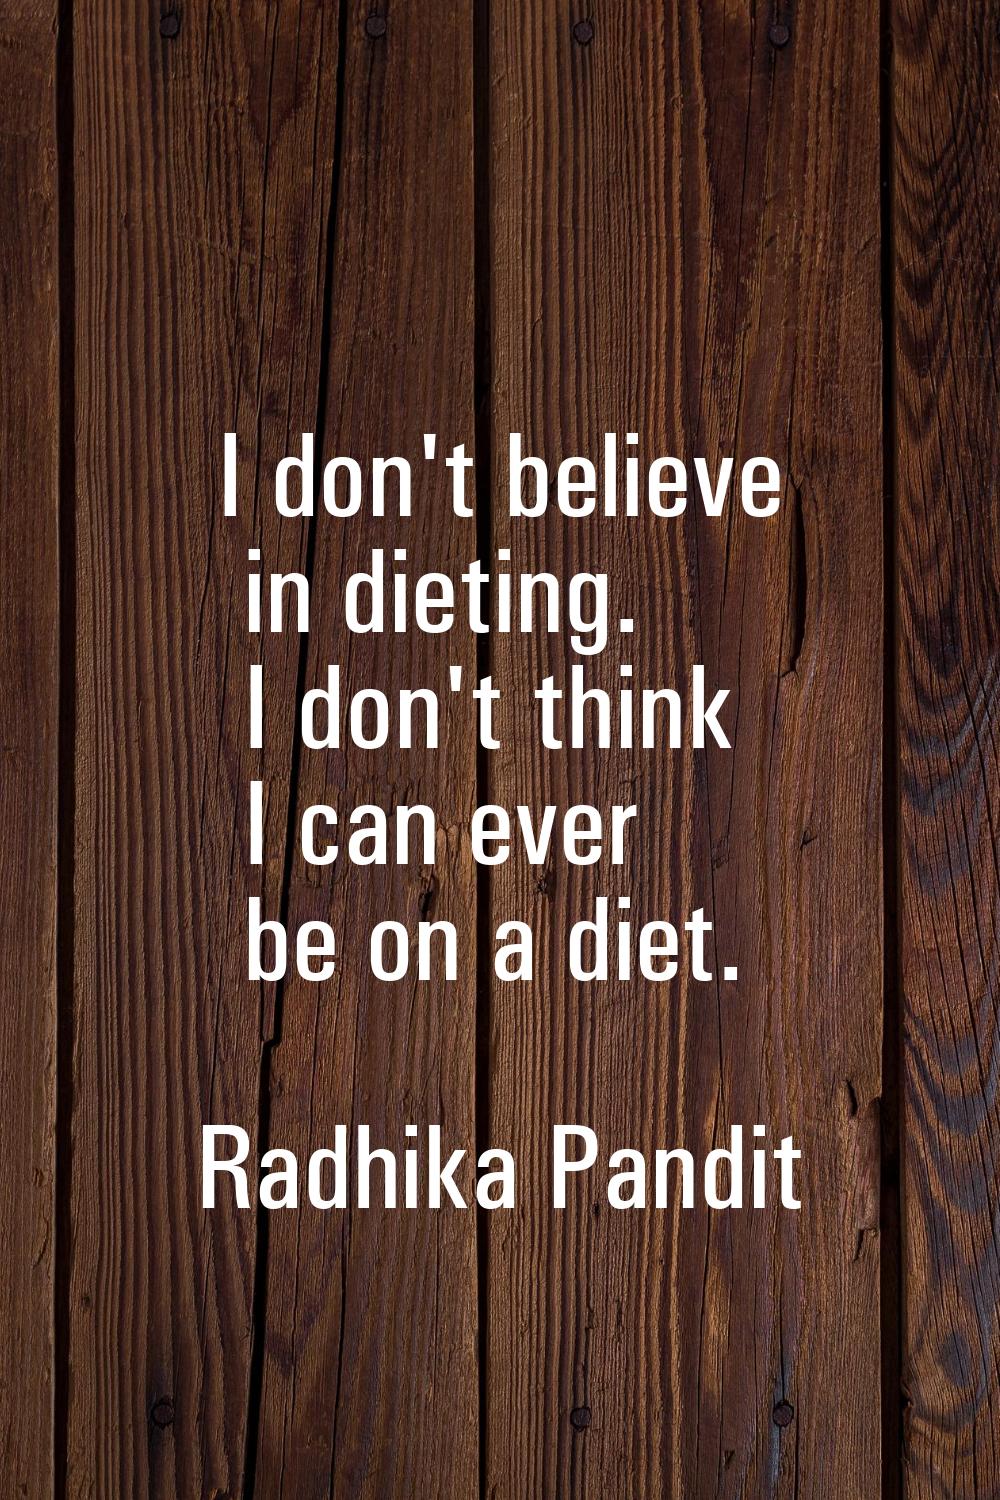 I don't believe in dieting. I don't think I can ever be on a diet.